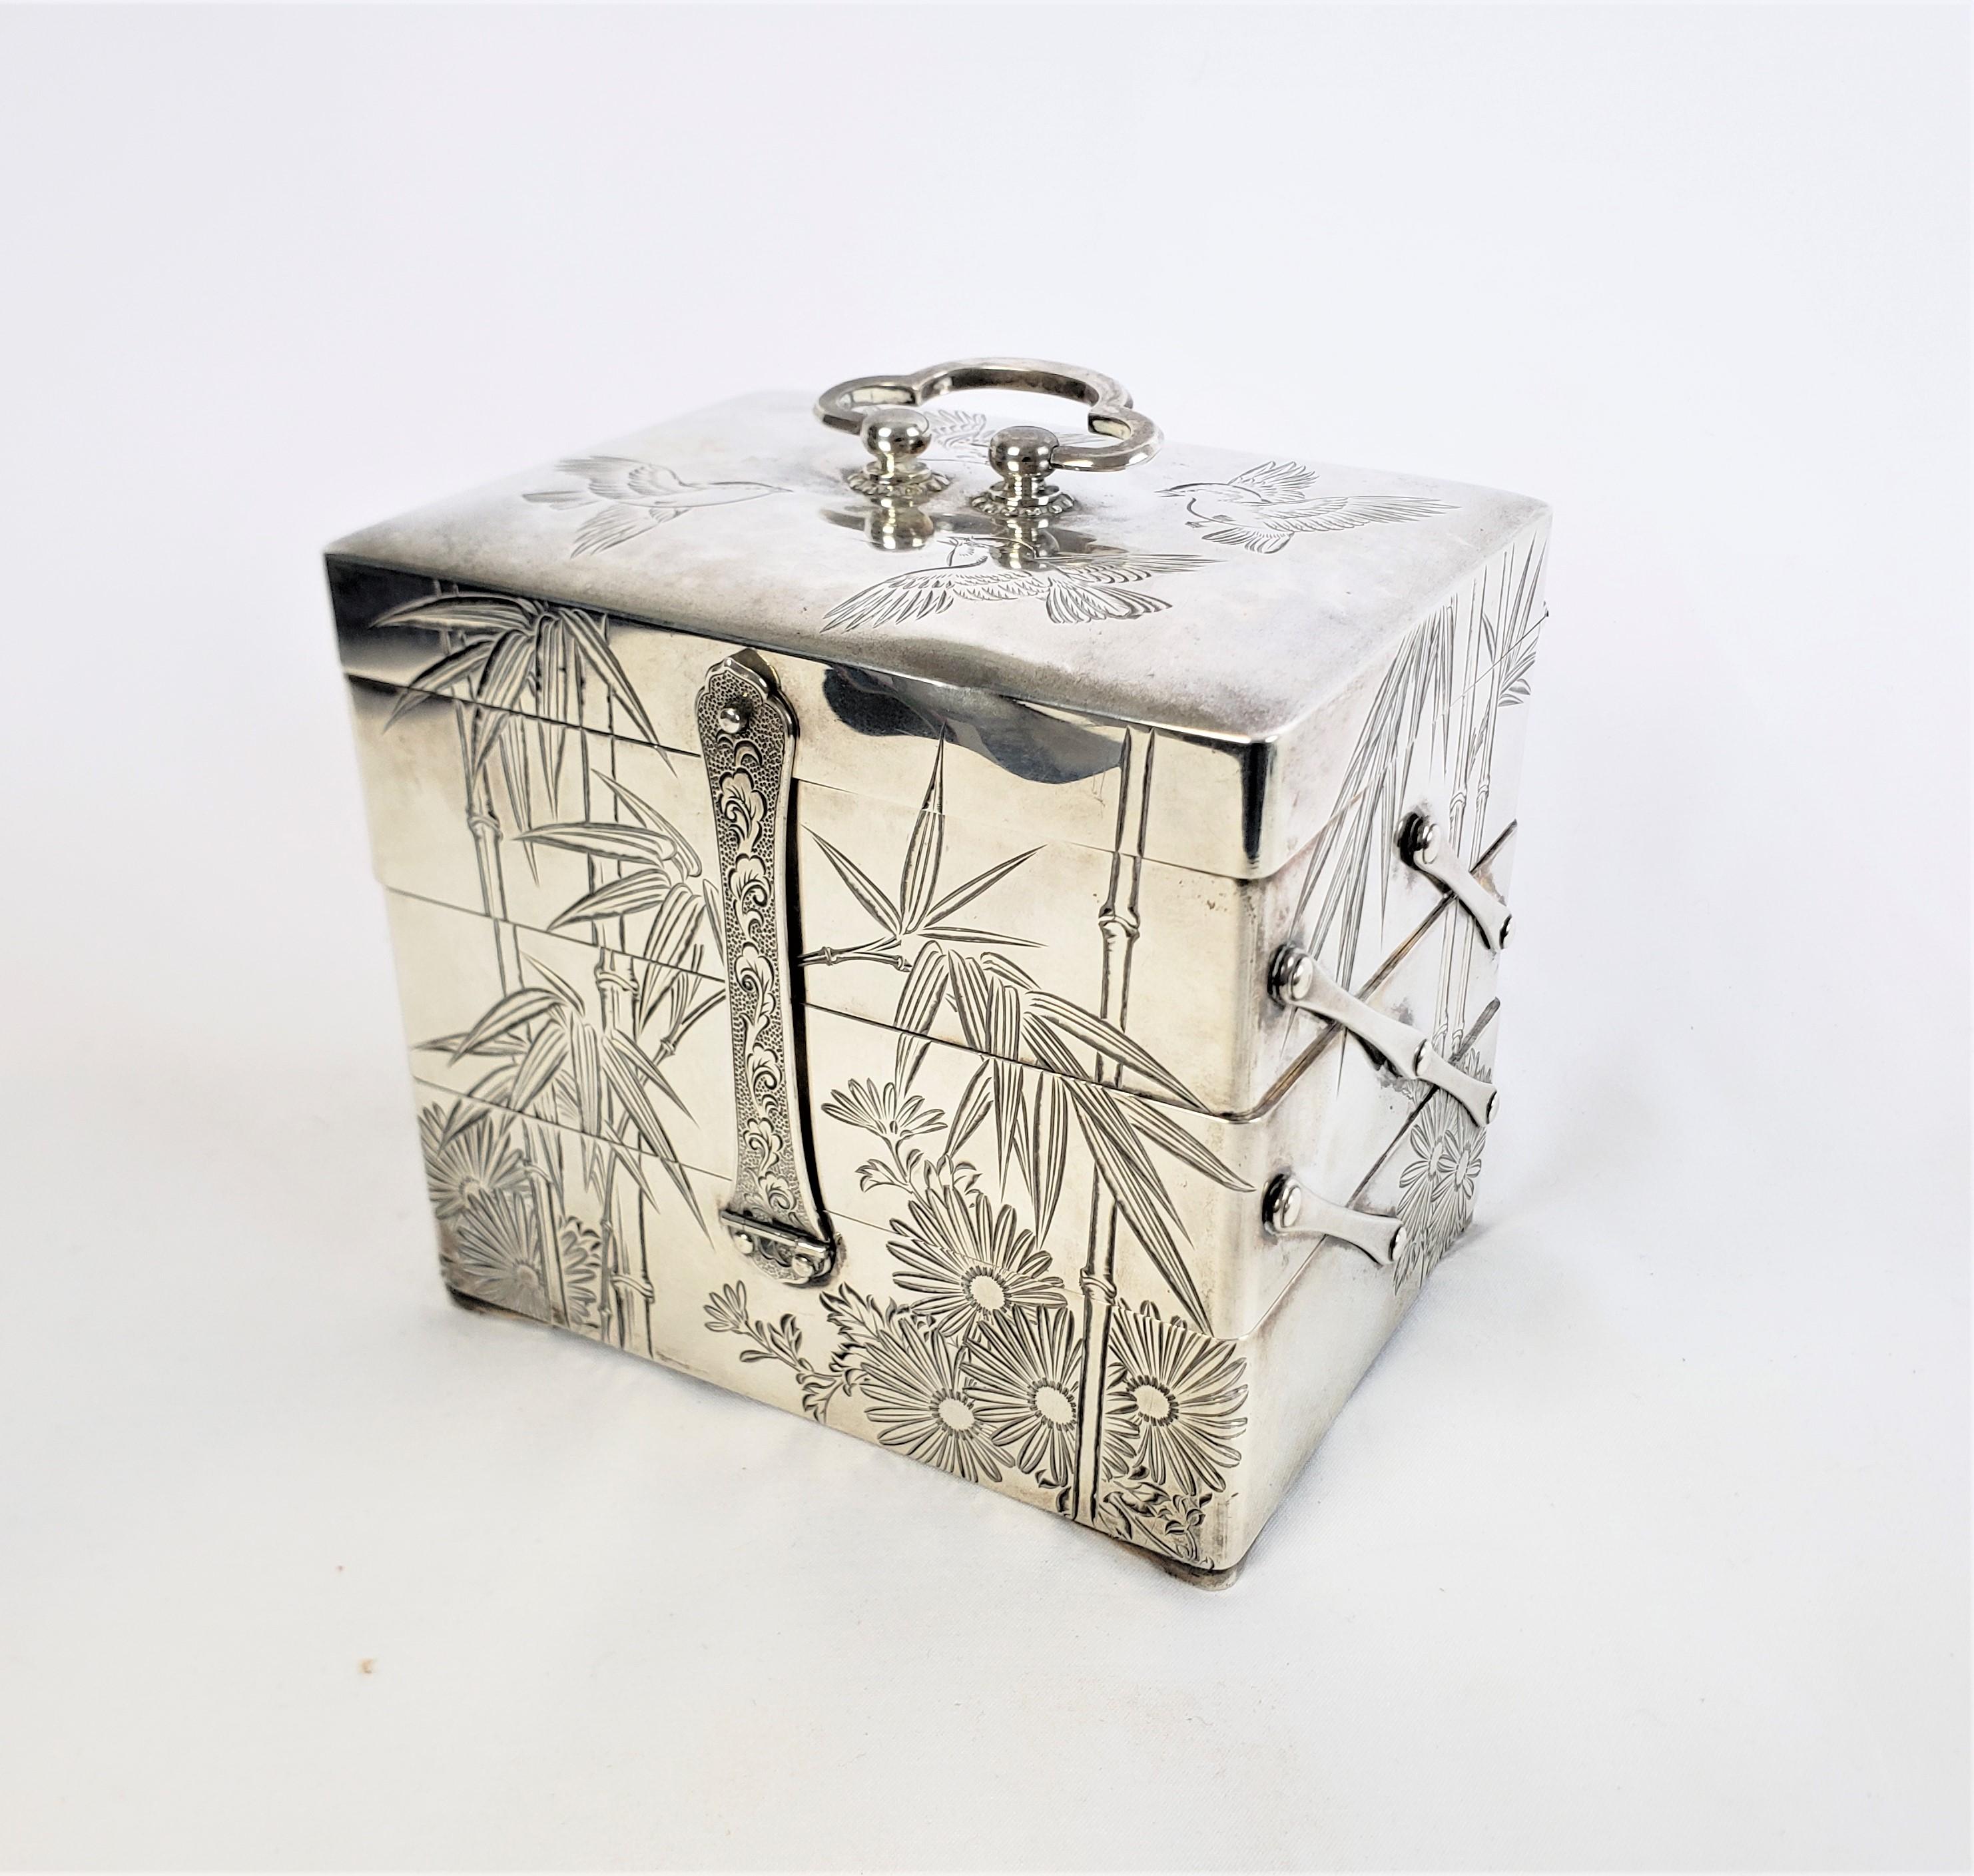 This antique jewelry box is unsigned, but presumed to have originated from Japan and date to approximately 1920 and done in the period Japanese Export style. The box is composed of silver over a wood frame with a latch on the front and back and